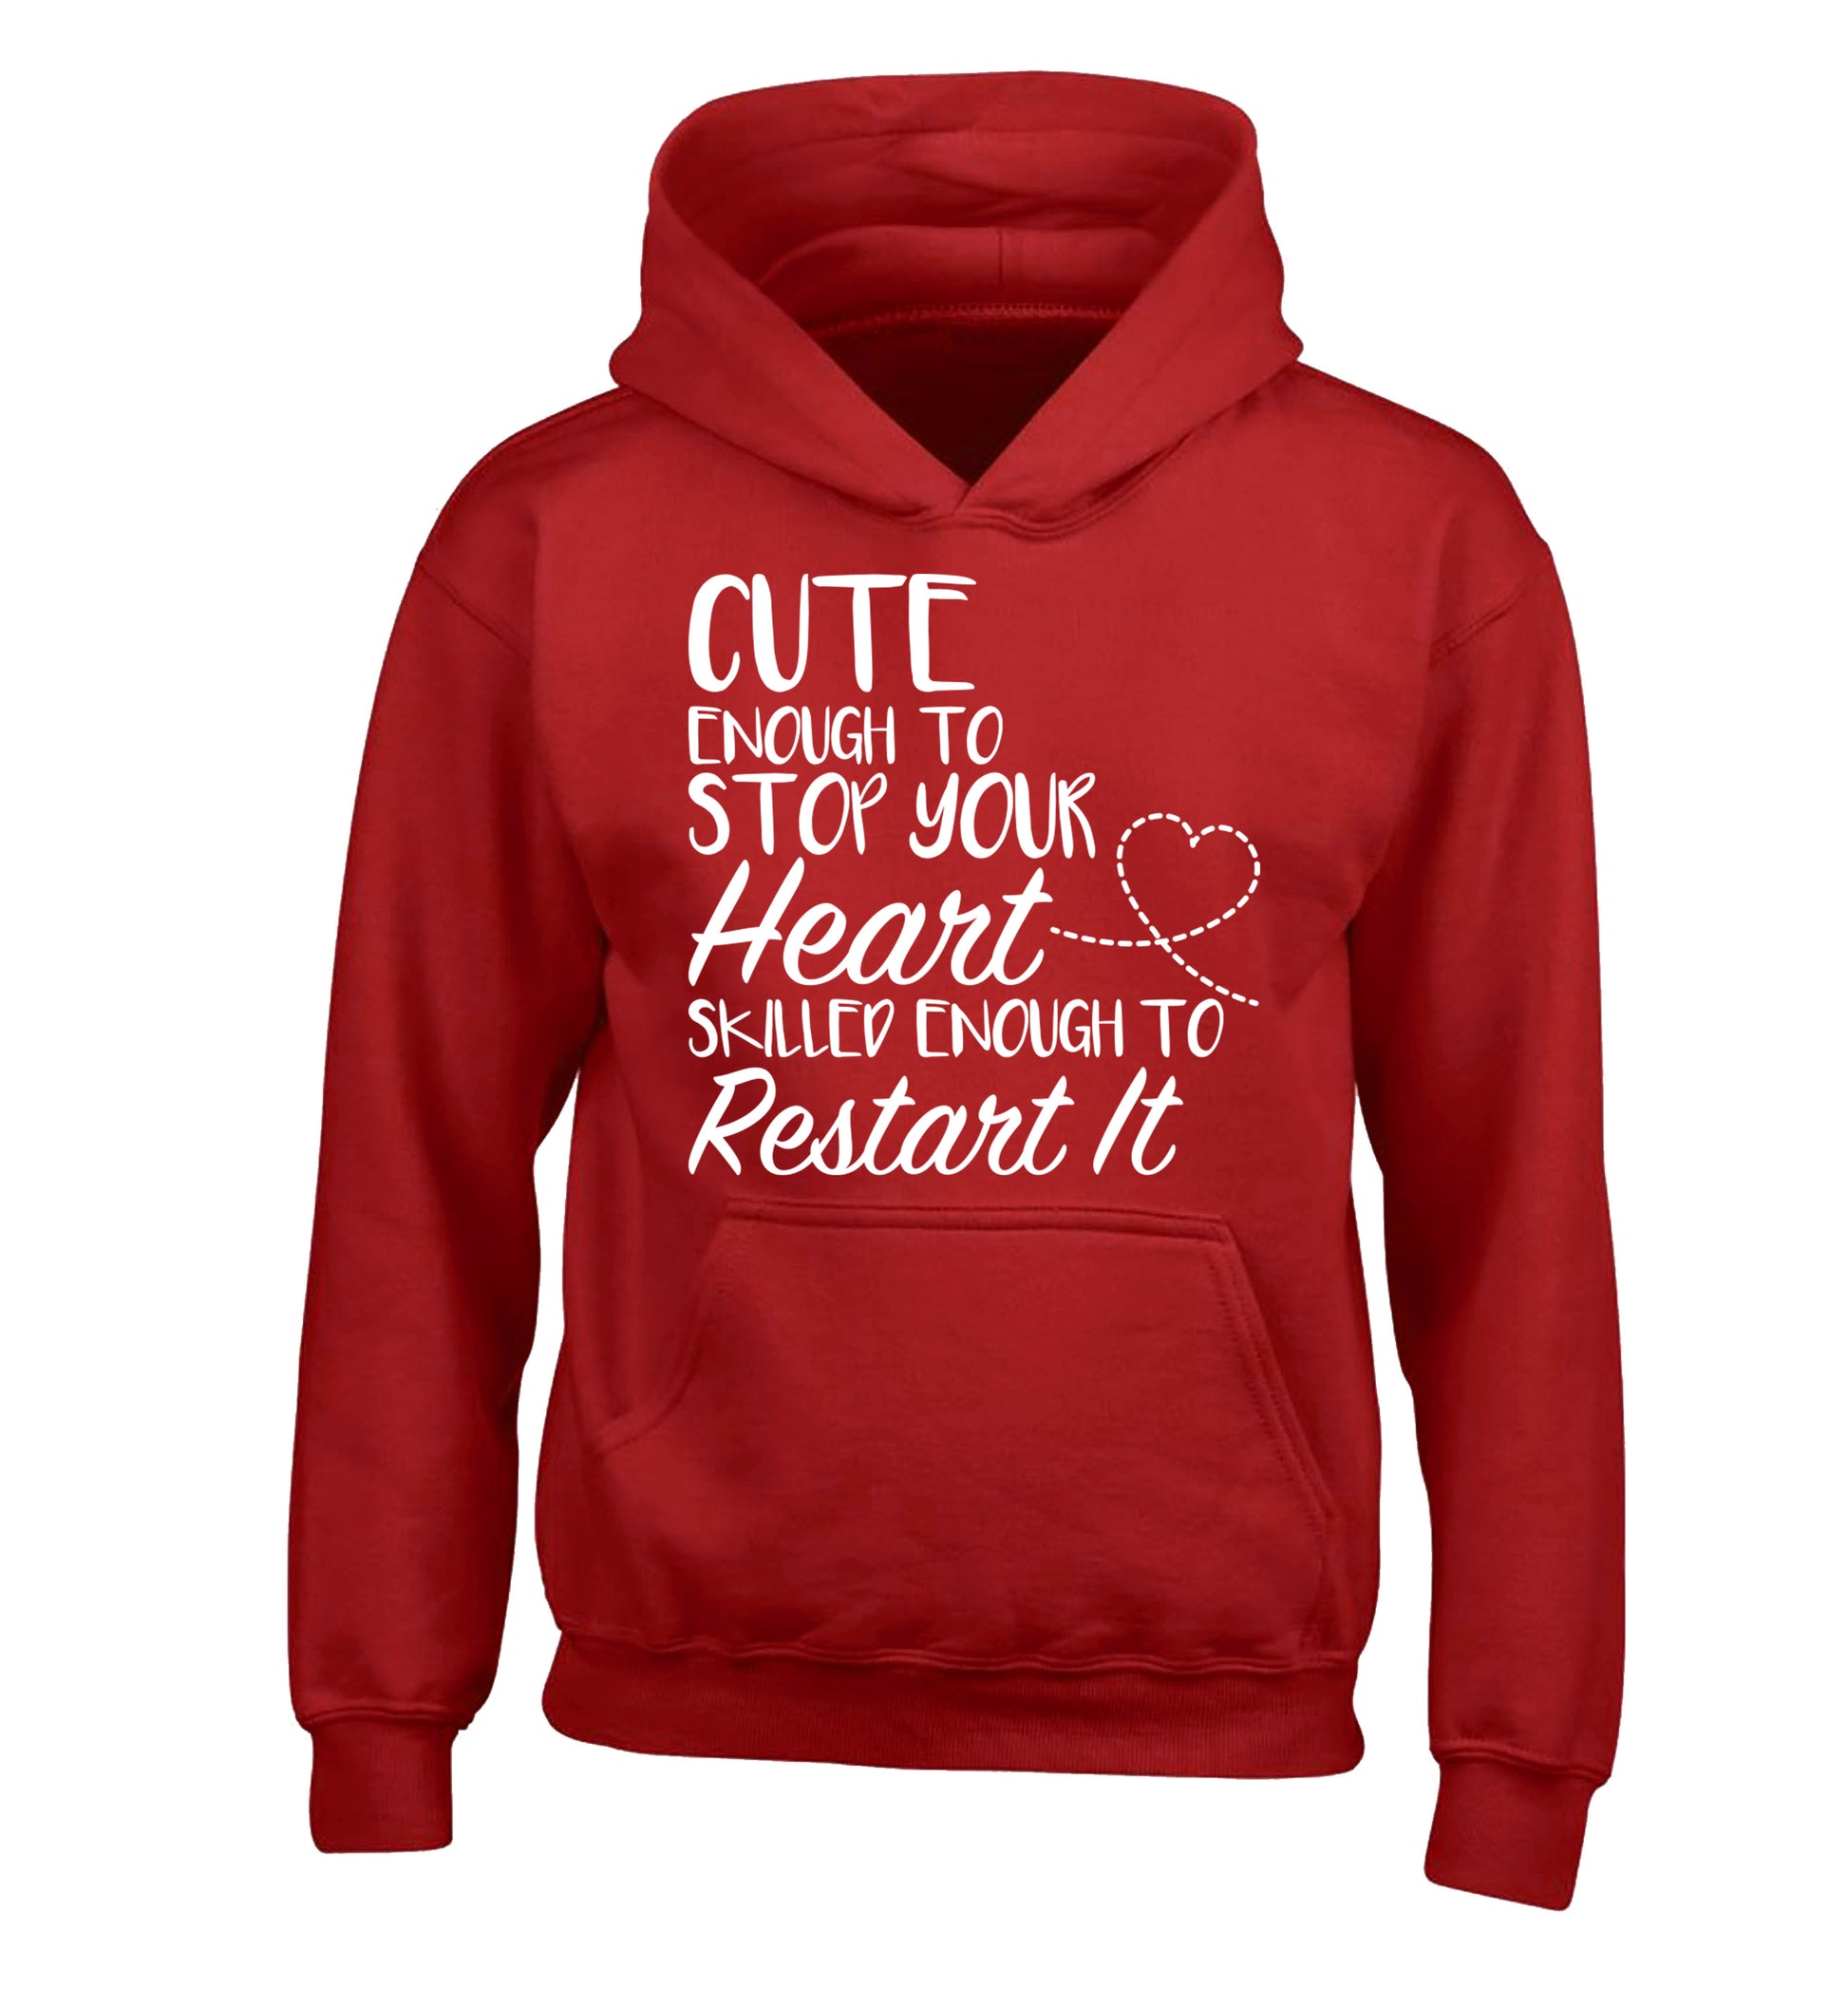 Cute enough to stop your heart skilled enough to restart it children's red hoodie 12-13 Years